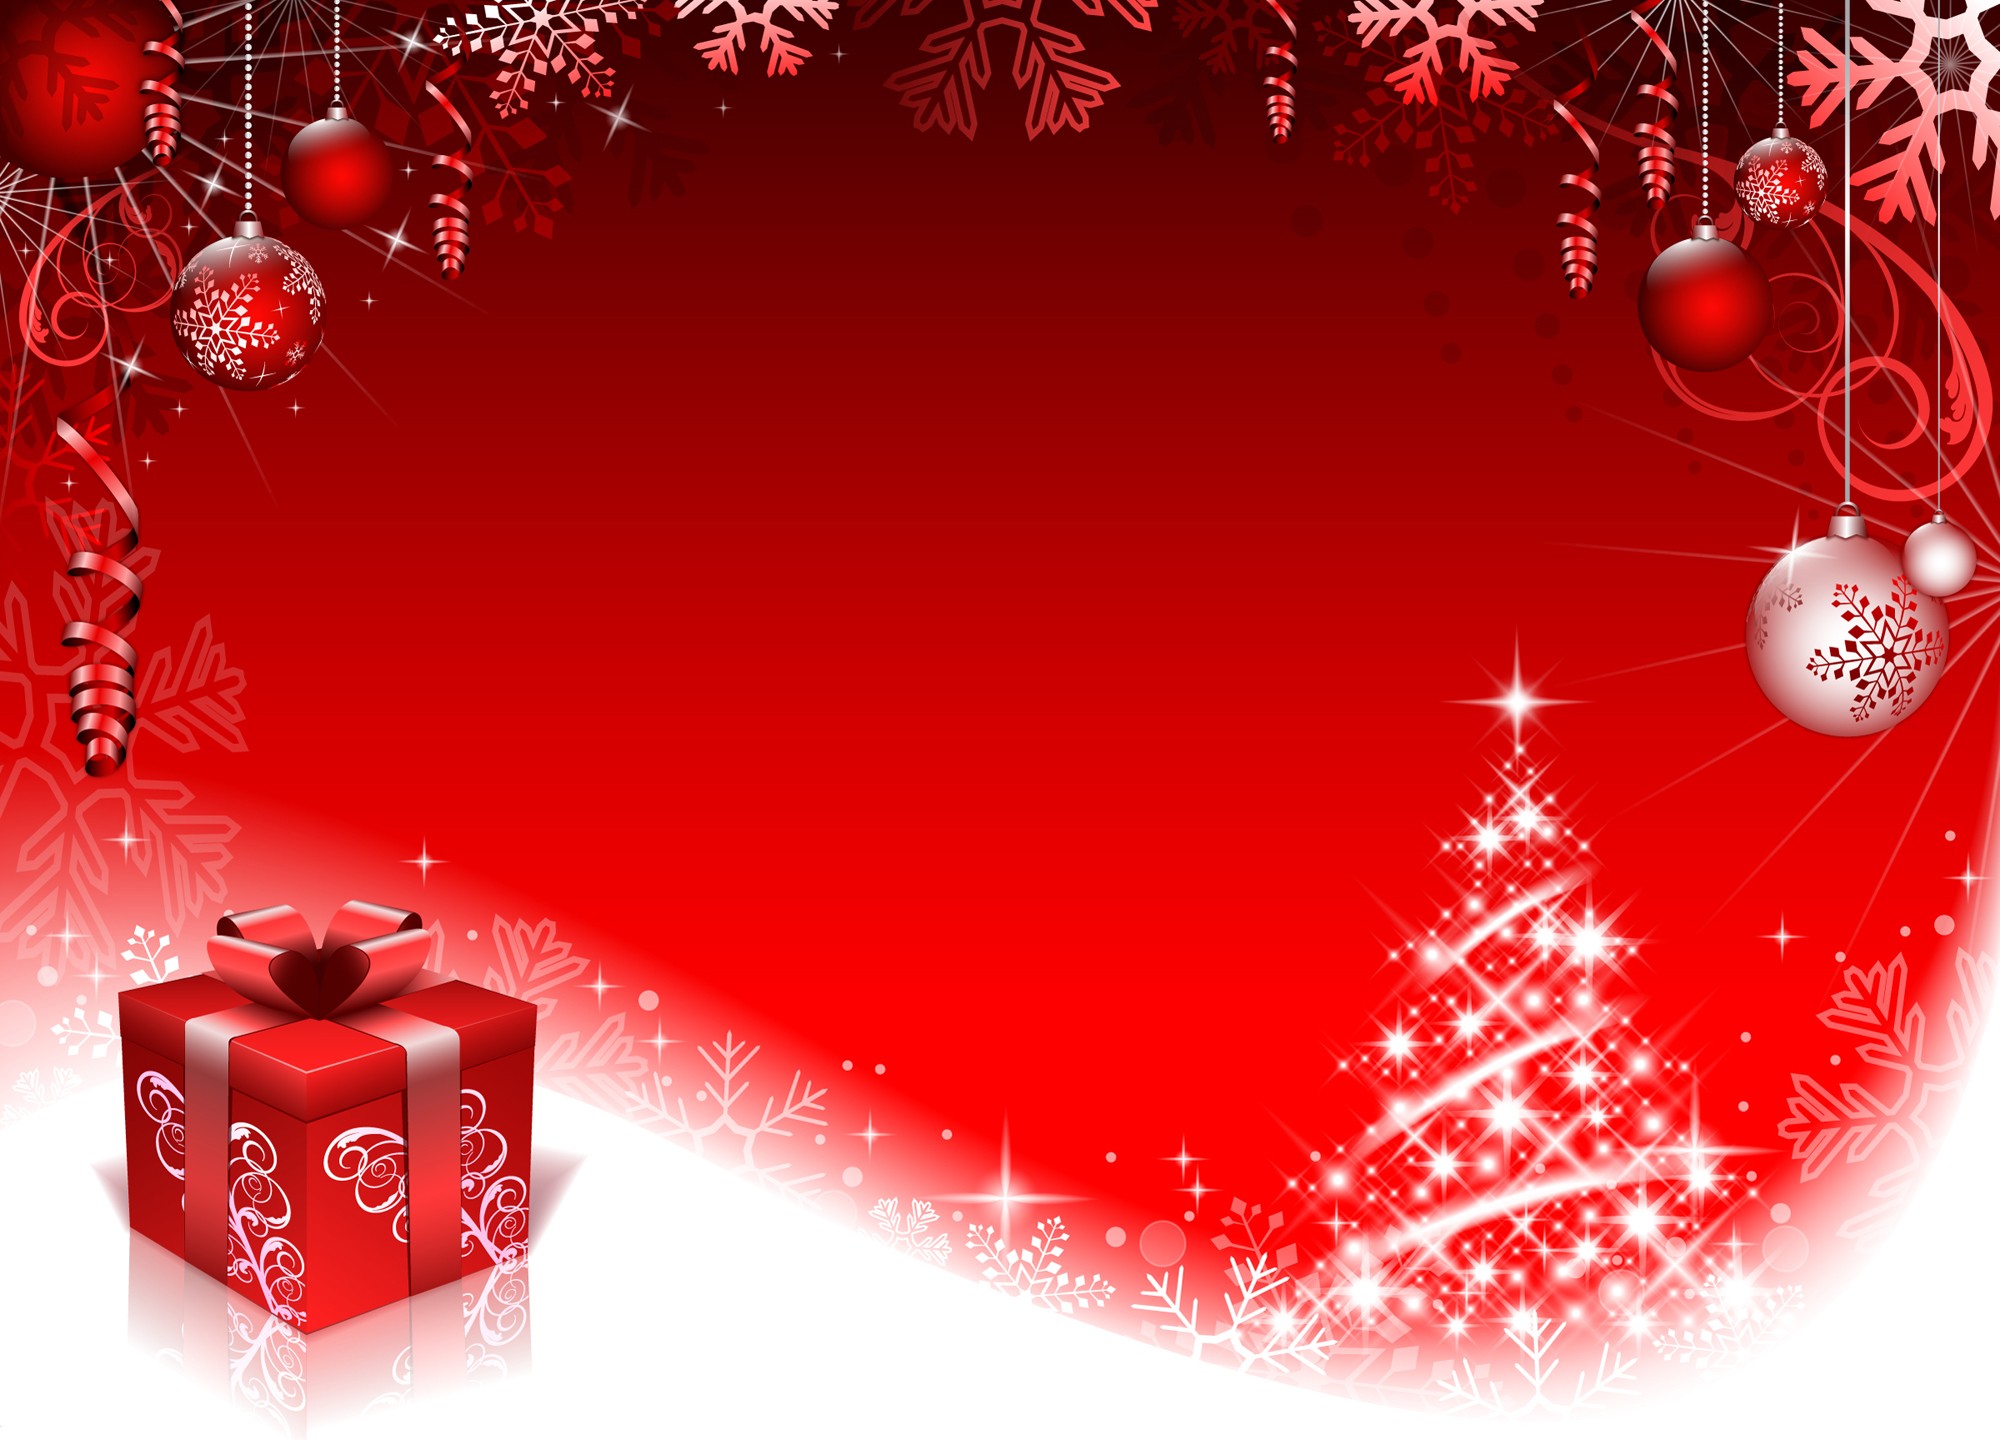 Red Style Christmas Background Art Vector 01 Free Download Photoshop Templates